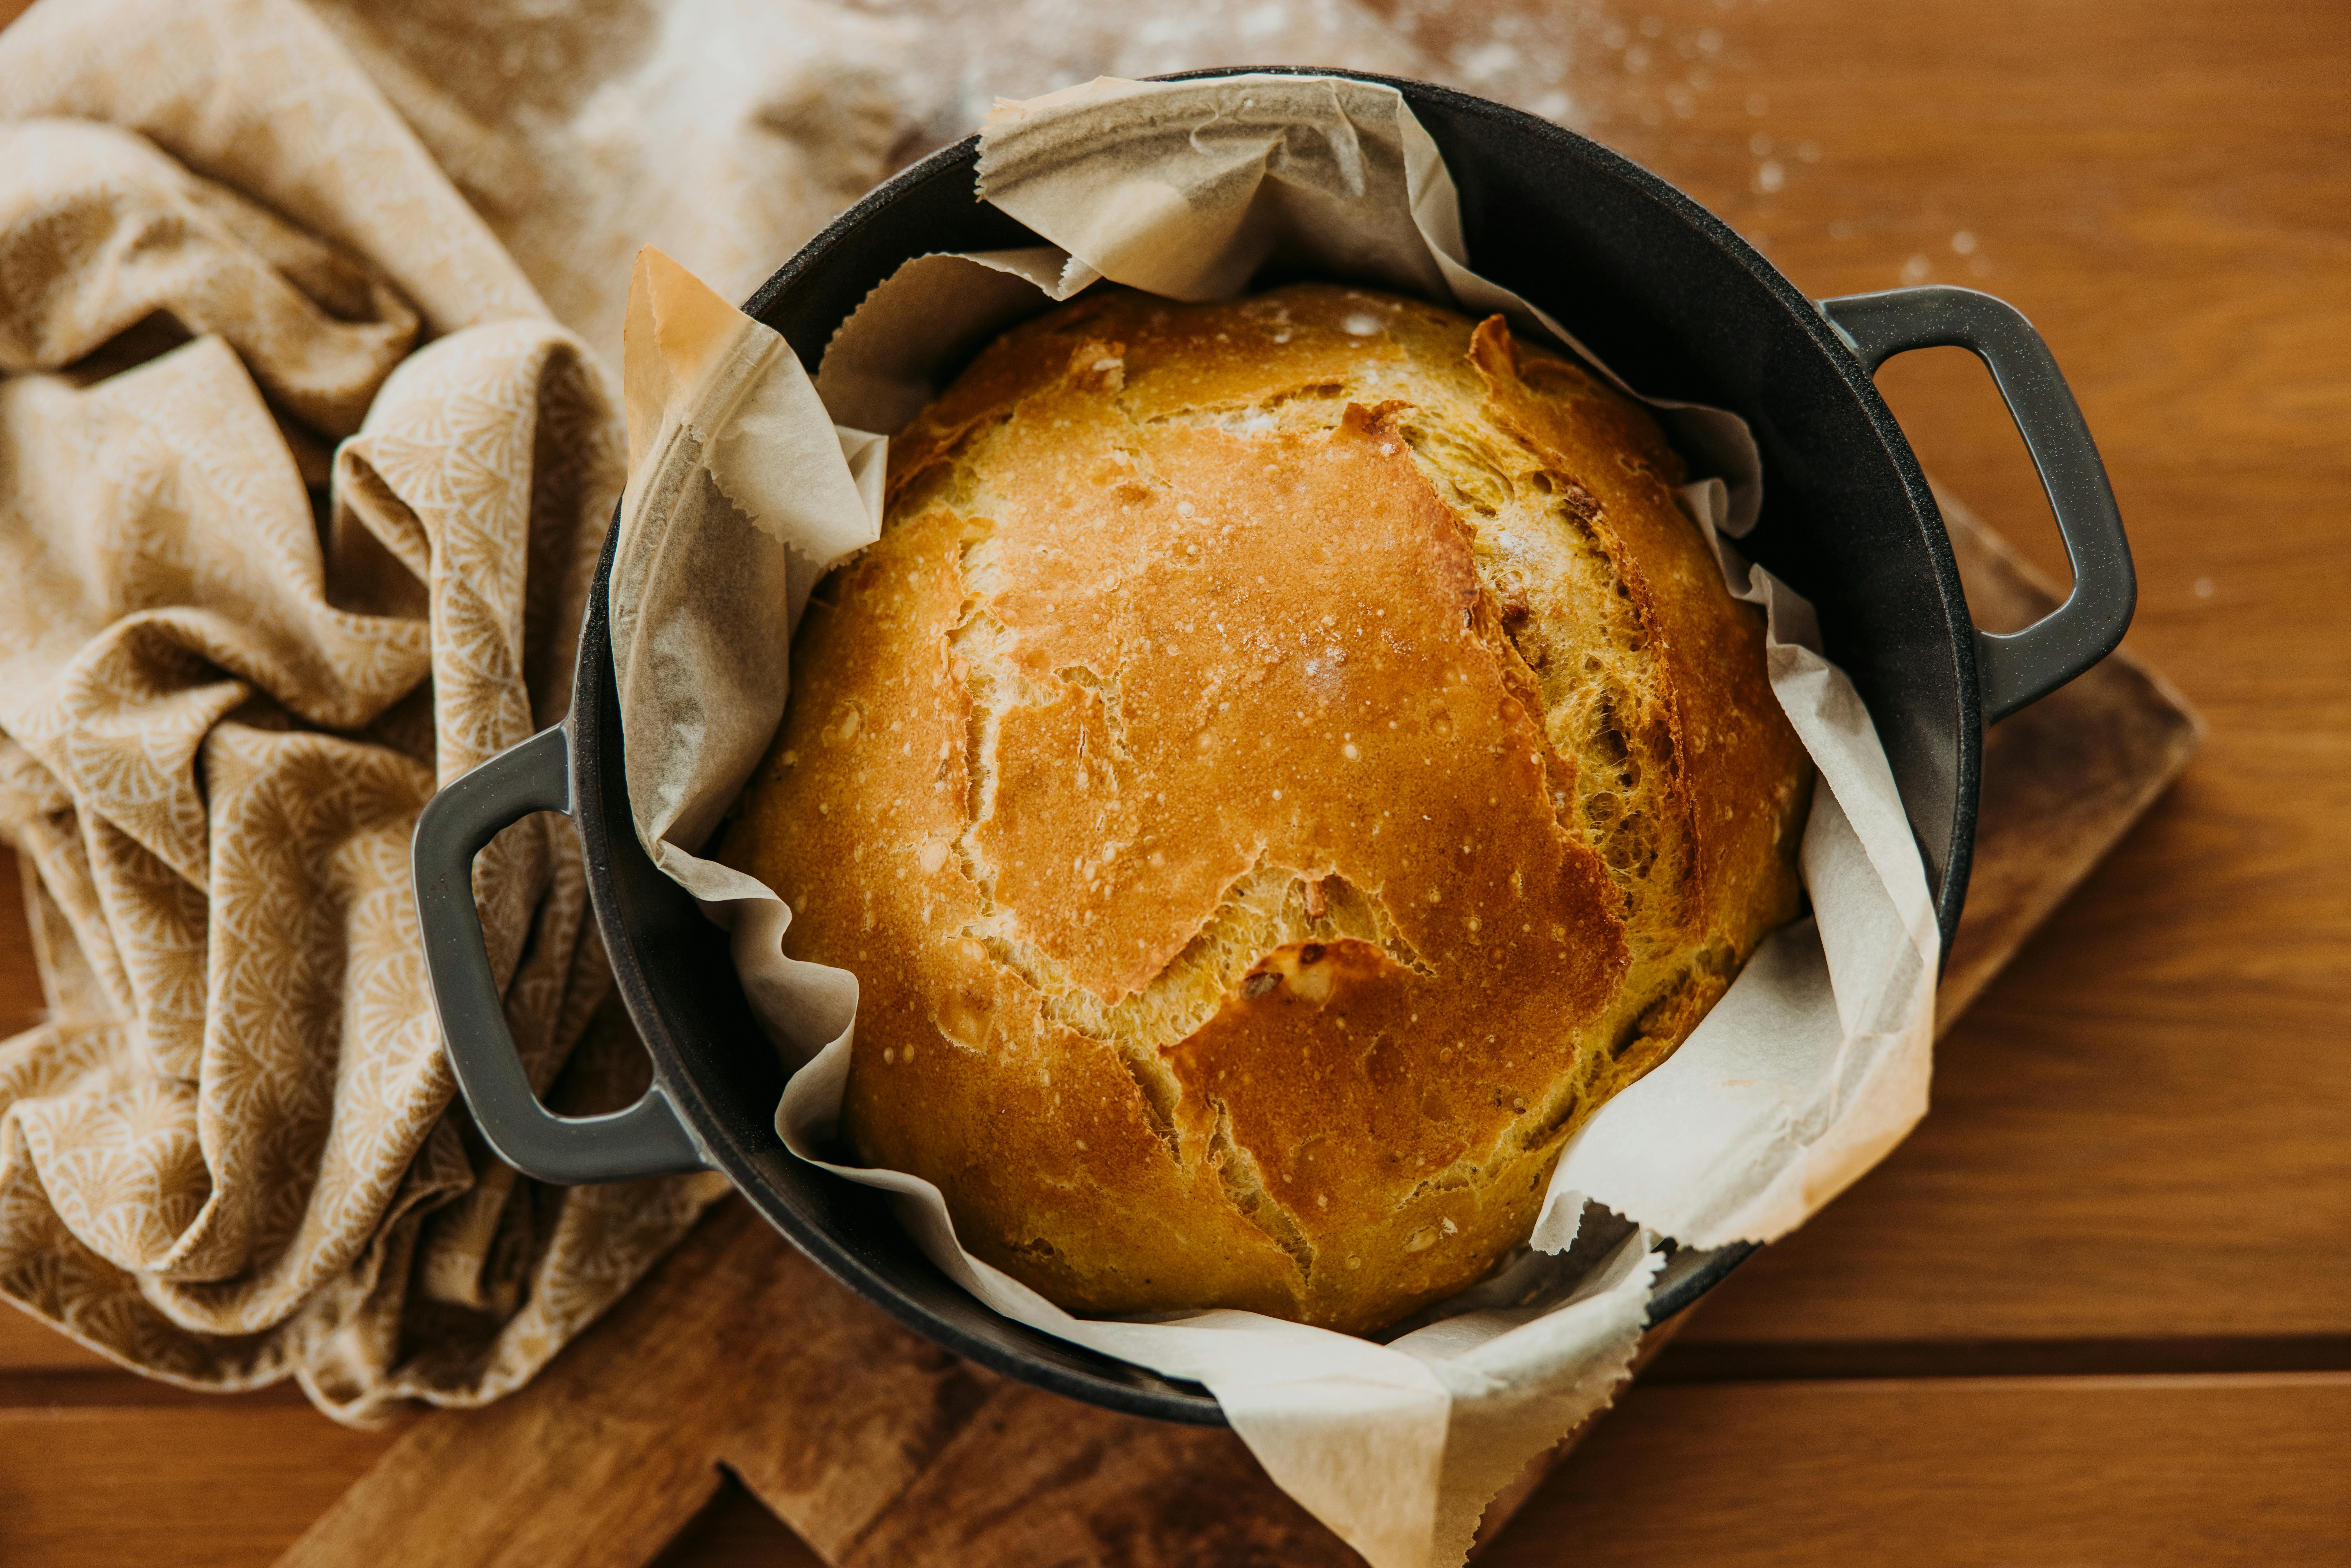 Le Creuset - We can't help it that bread is one of our favorite foods!  We're resolving to cook at home more this month, and bread is where we're  starting:  Join